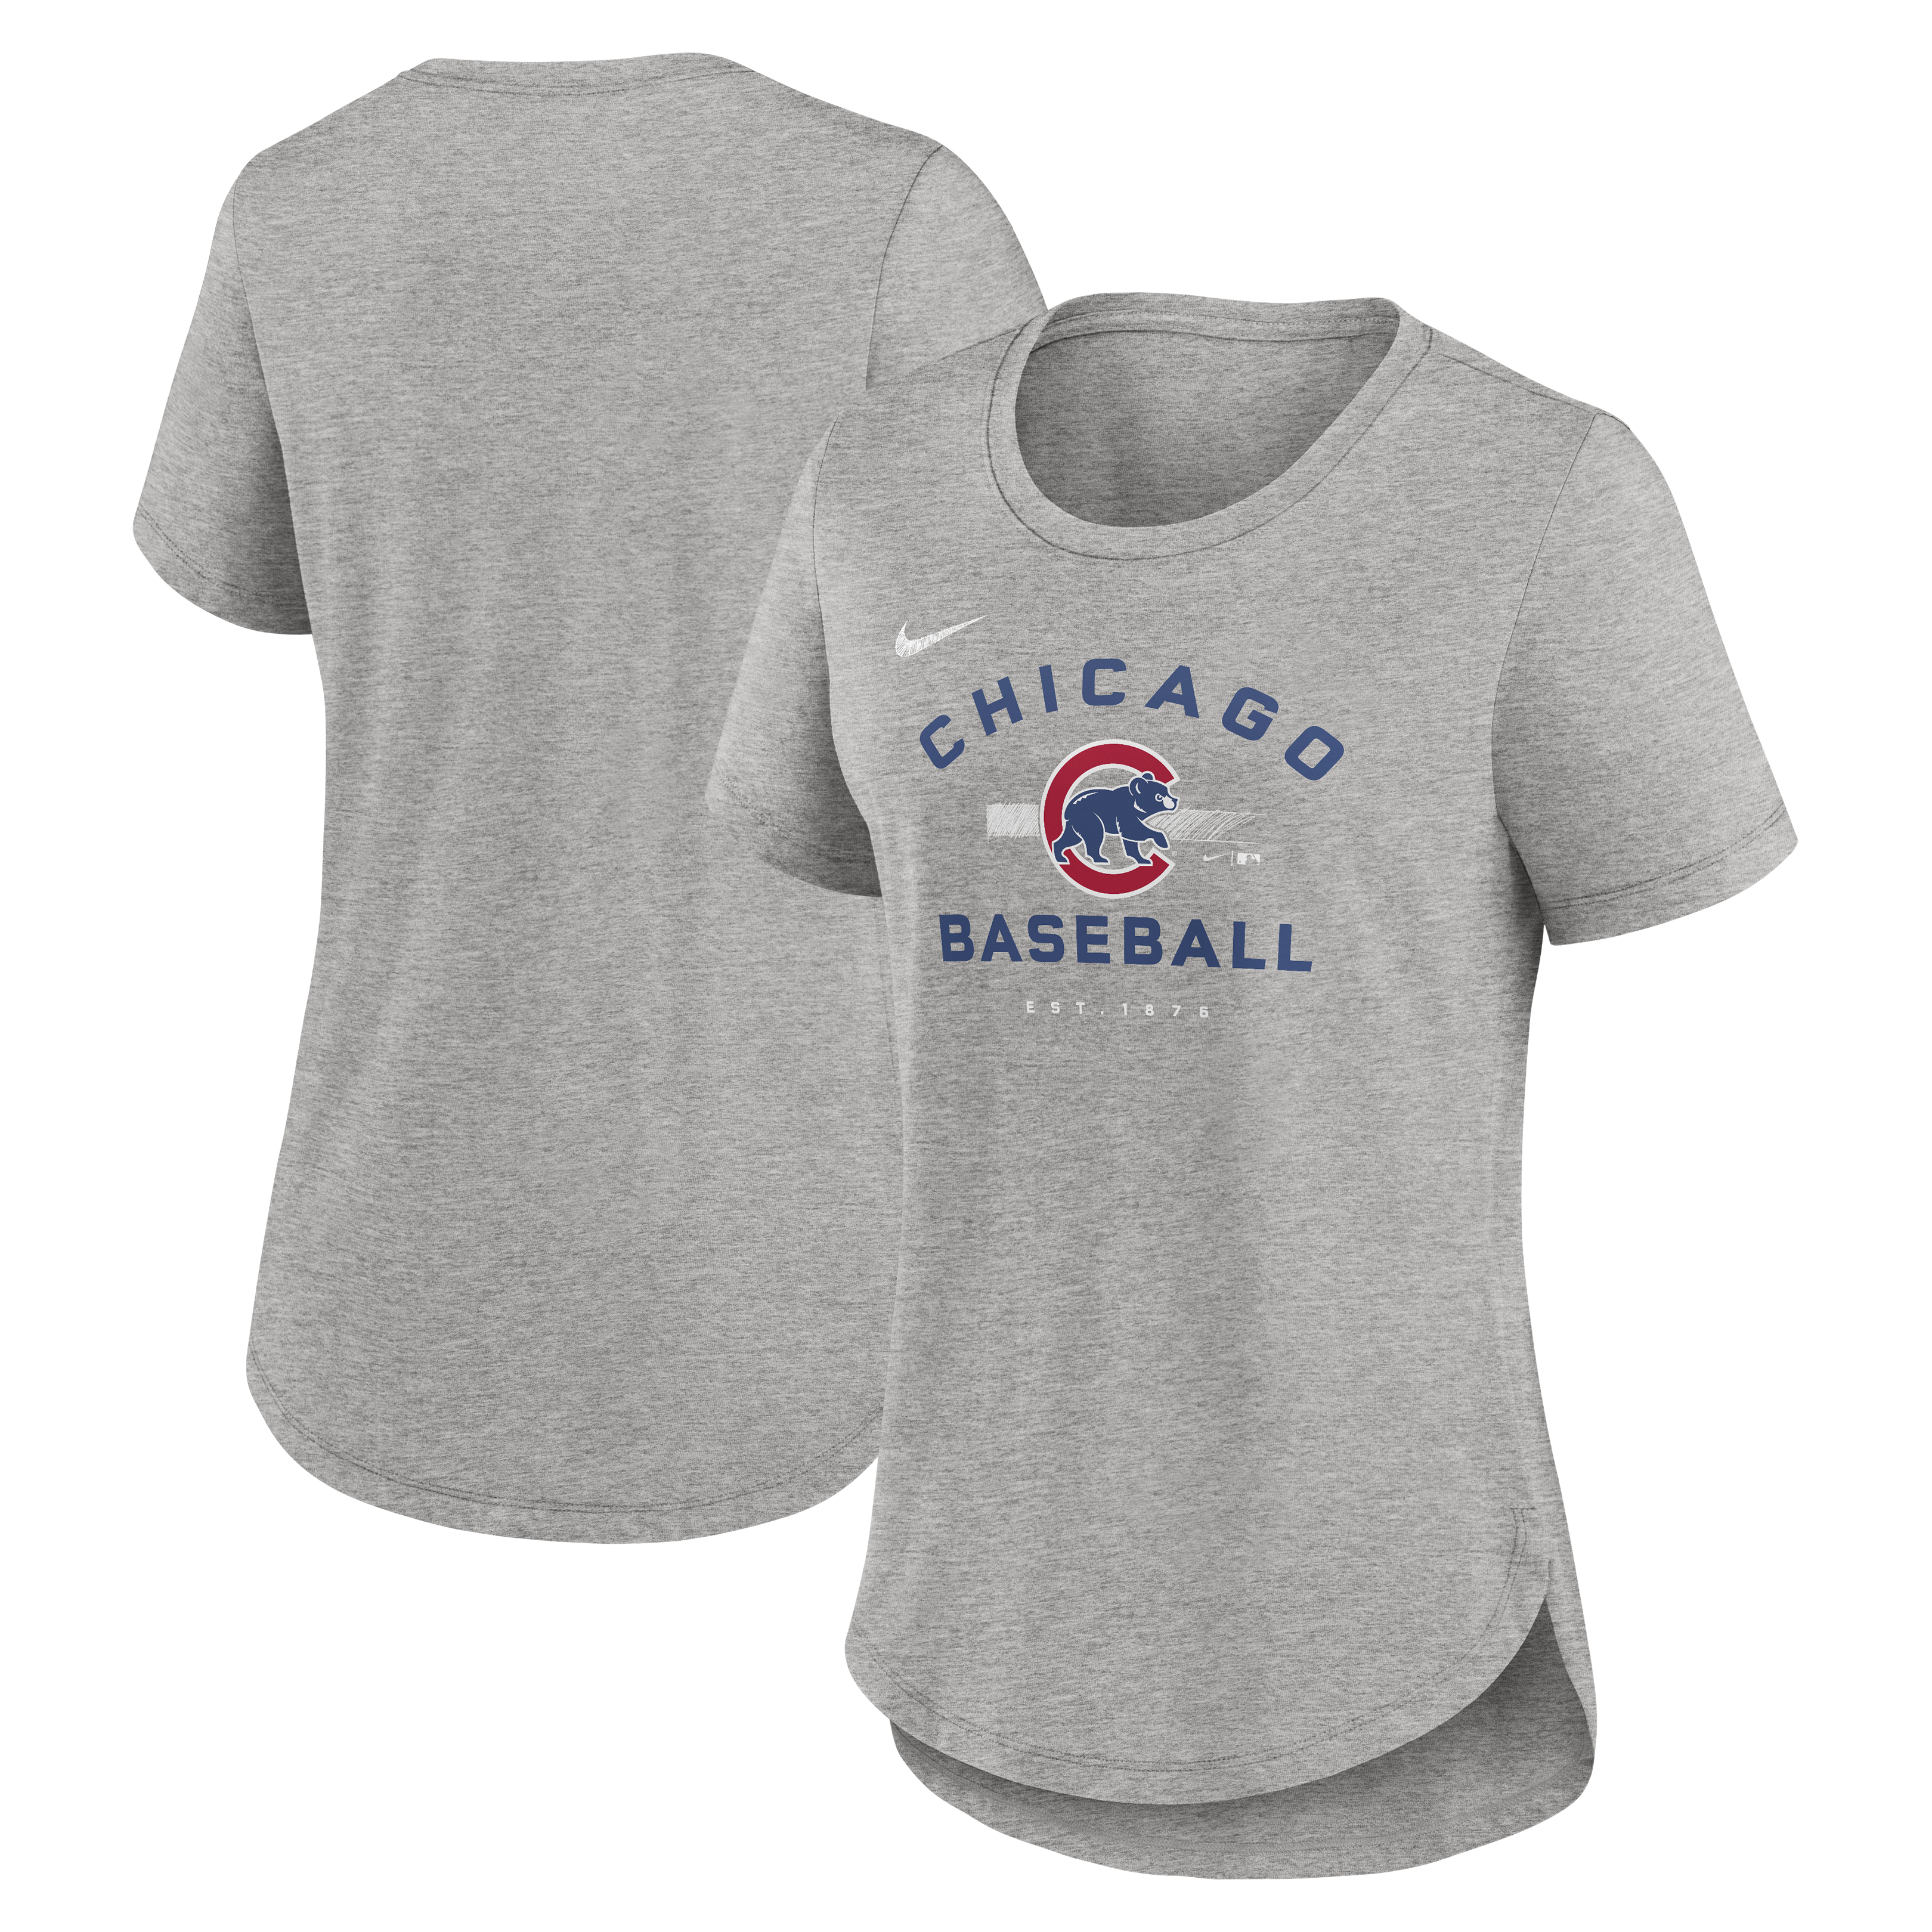 Kids Chicago Cubs Nike Gifts & Gear, Youth Nike Cubs Apparel, Nike